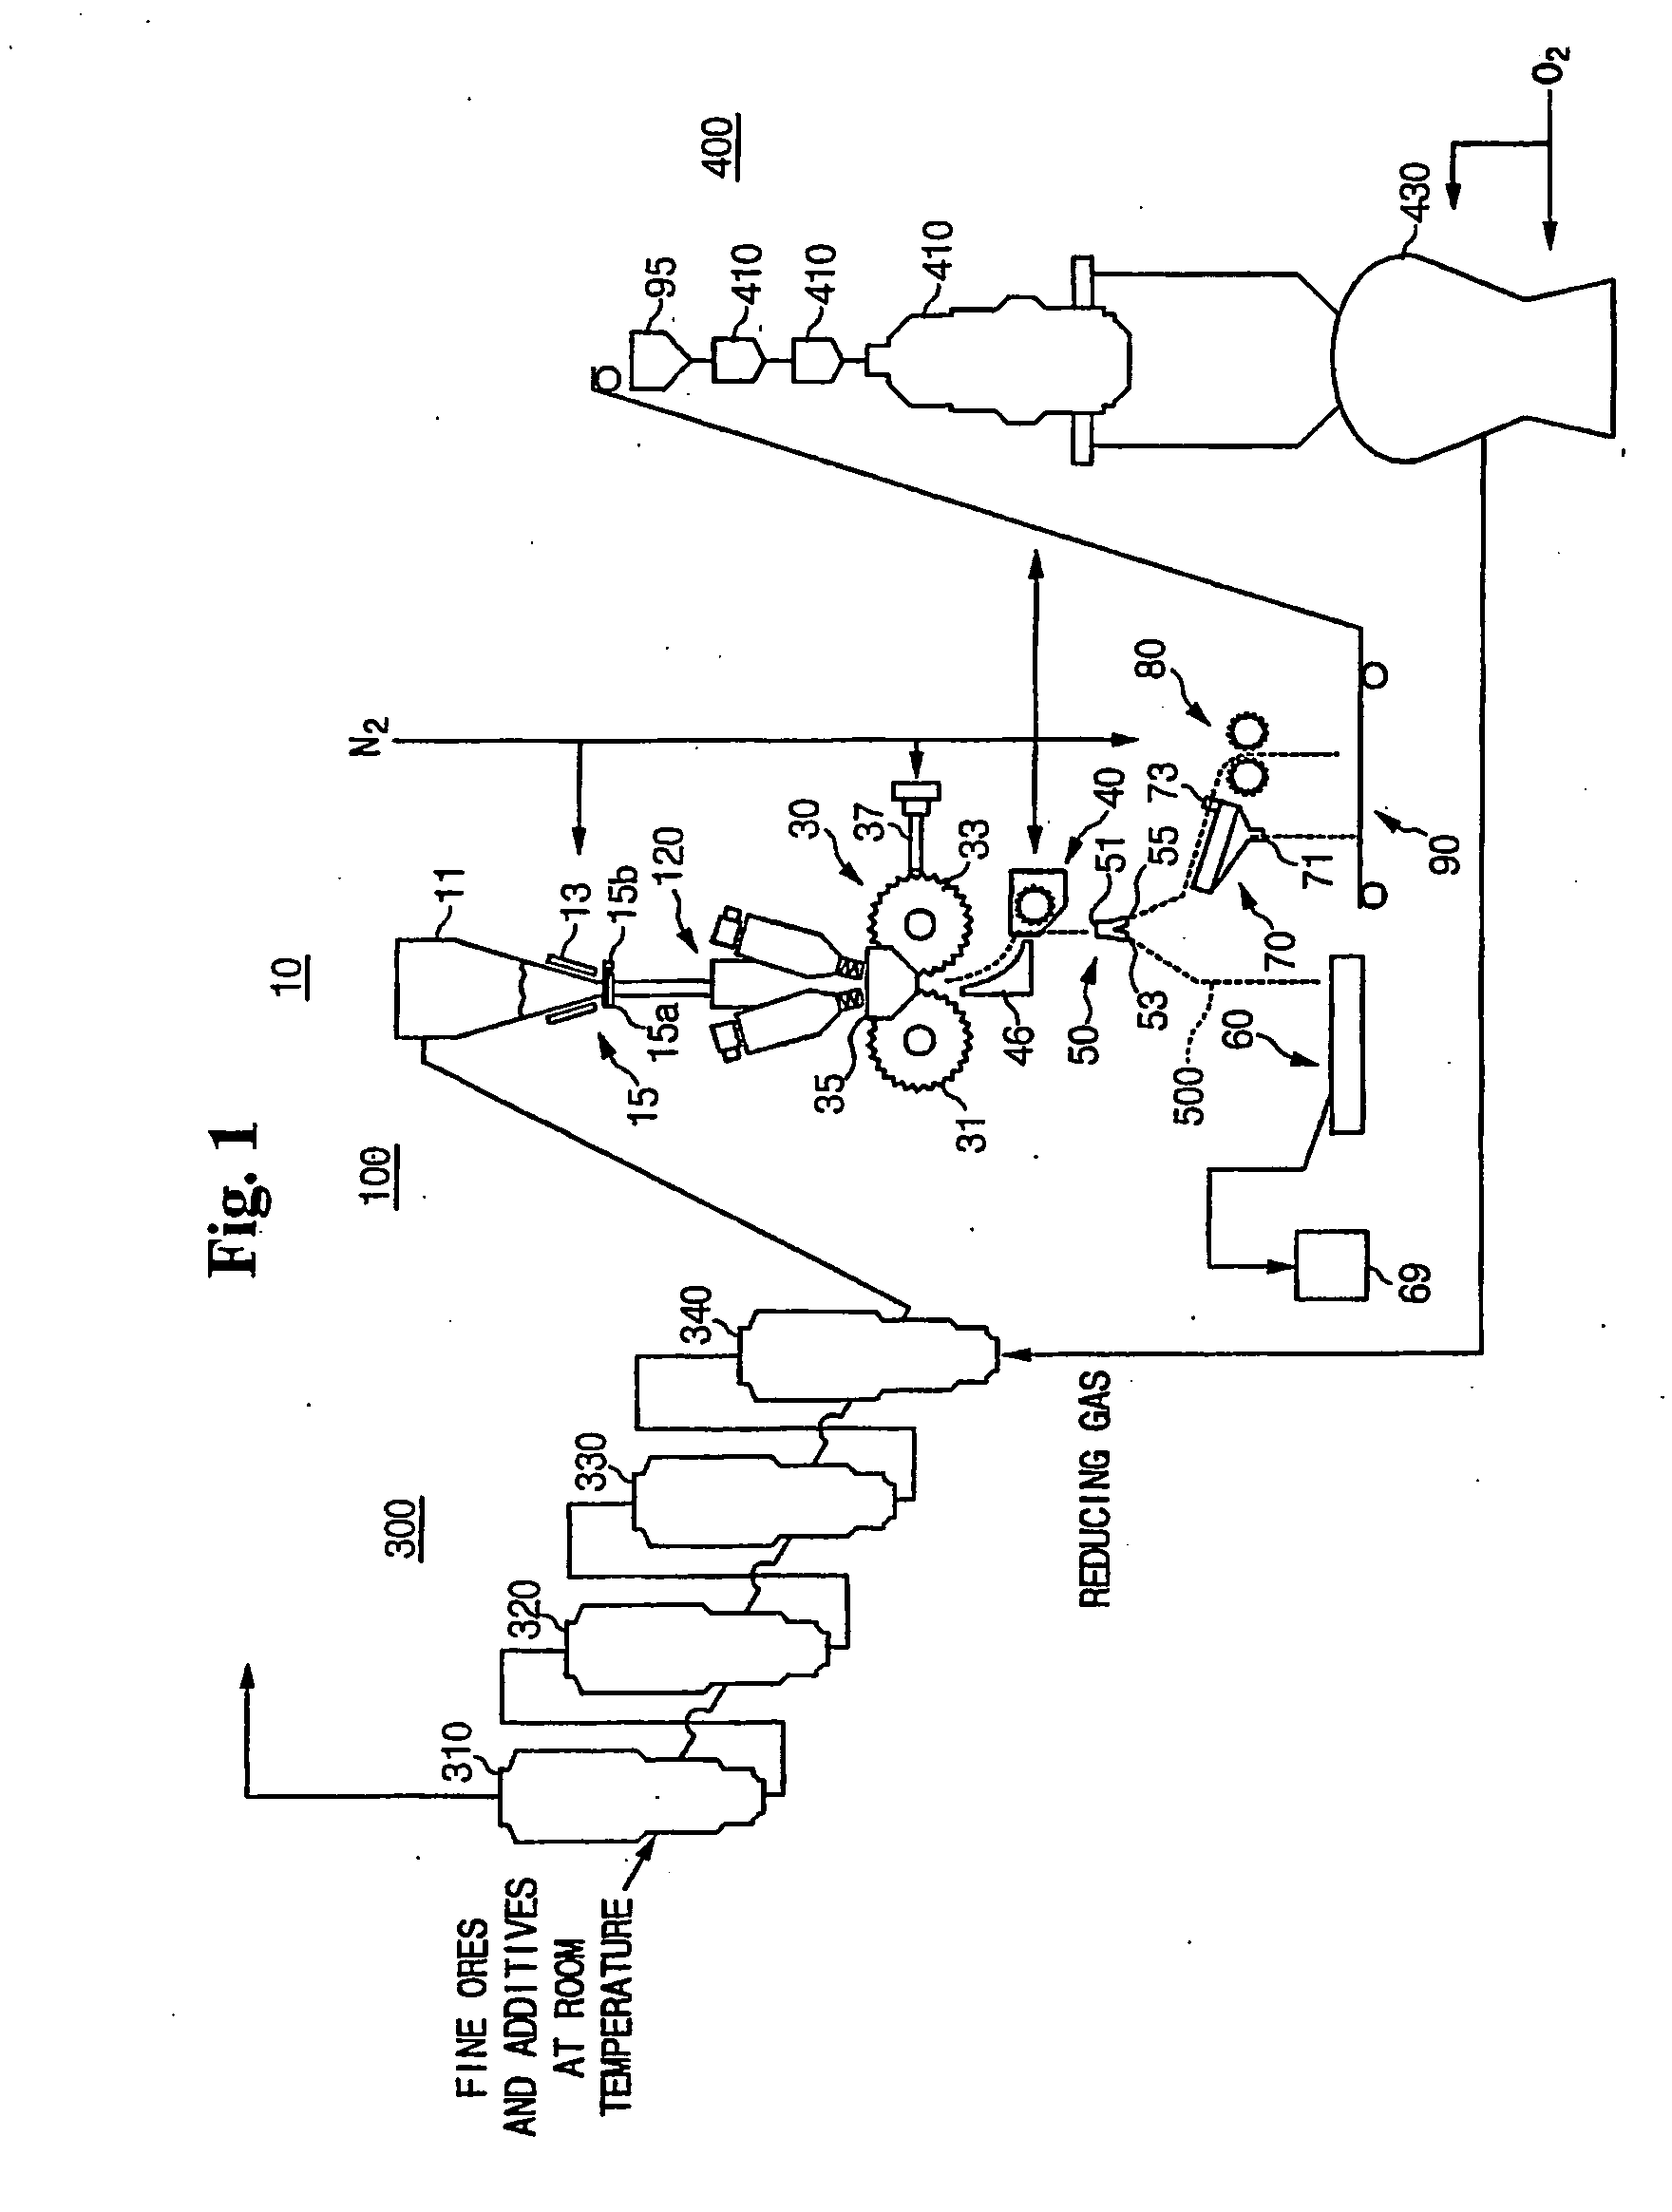 Apparatus for manufacturing molten irons by hot compacting fine direct reduced irons and calcined additives and method using the same